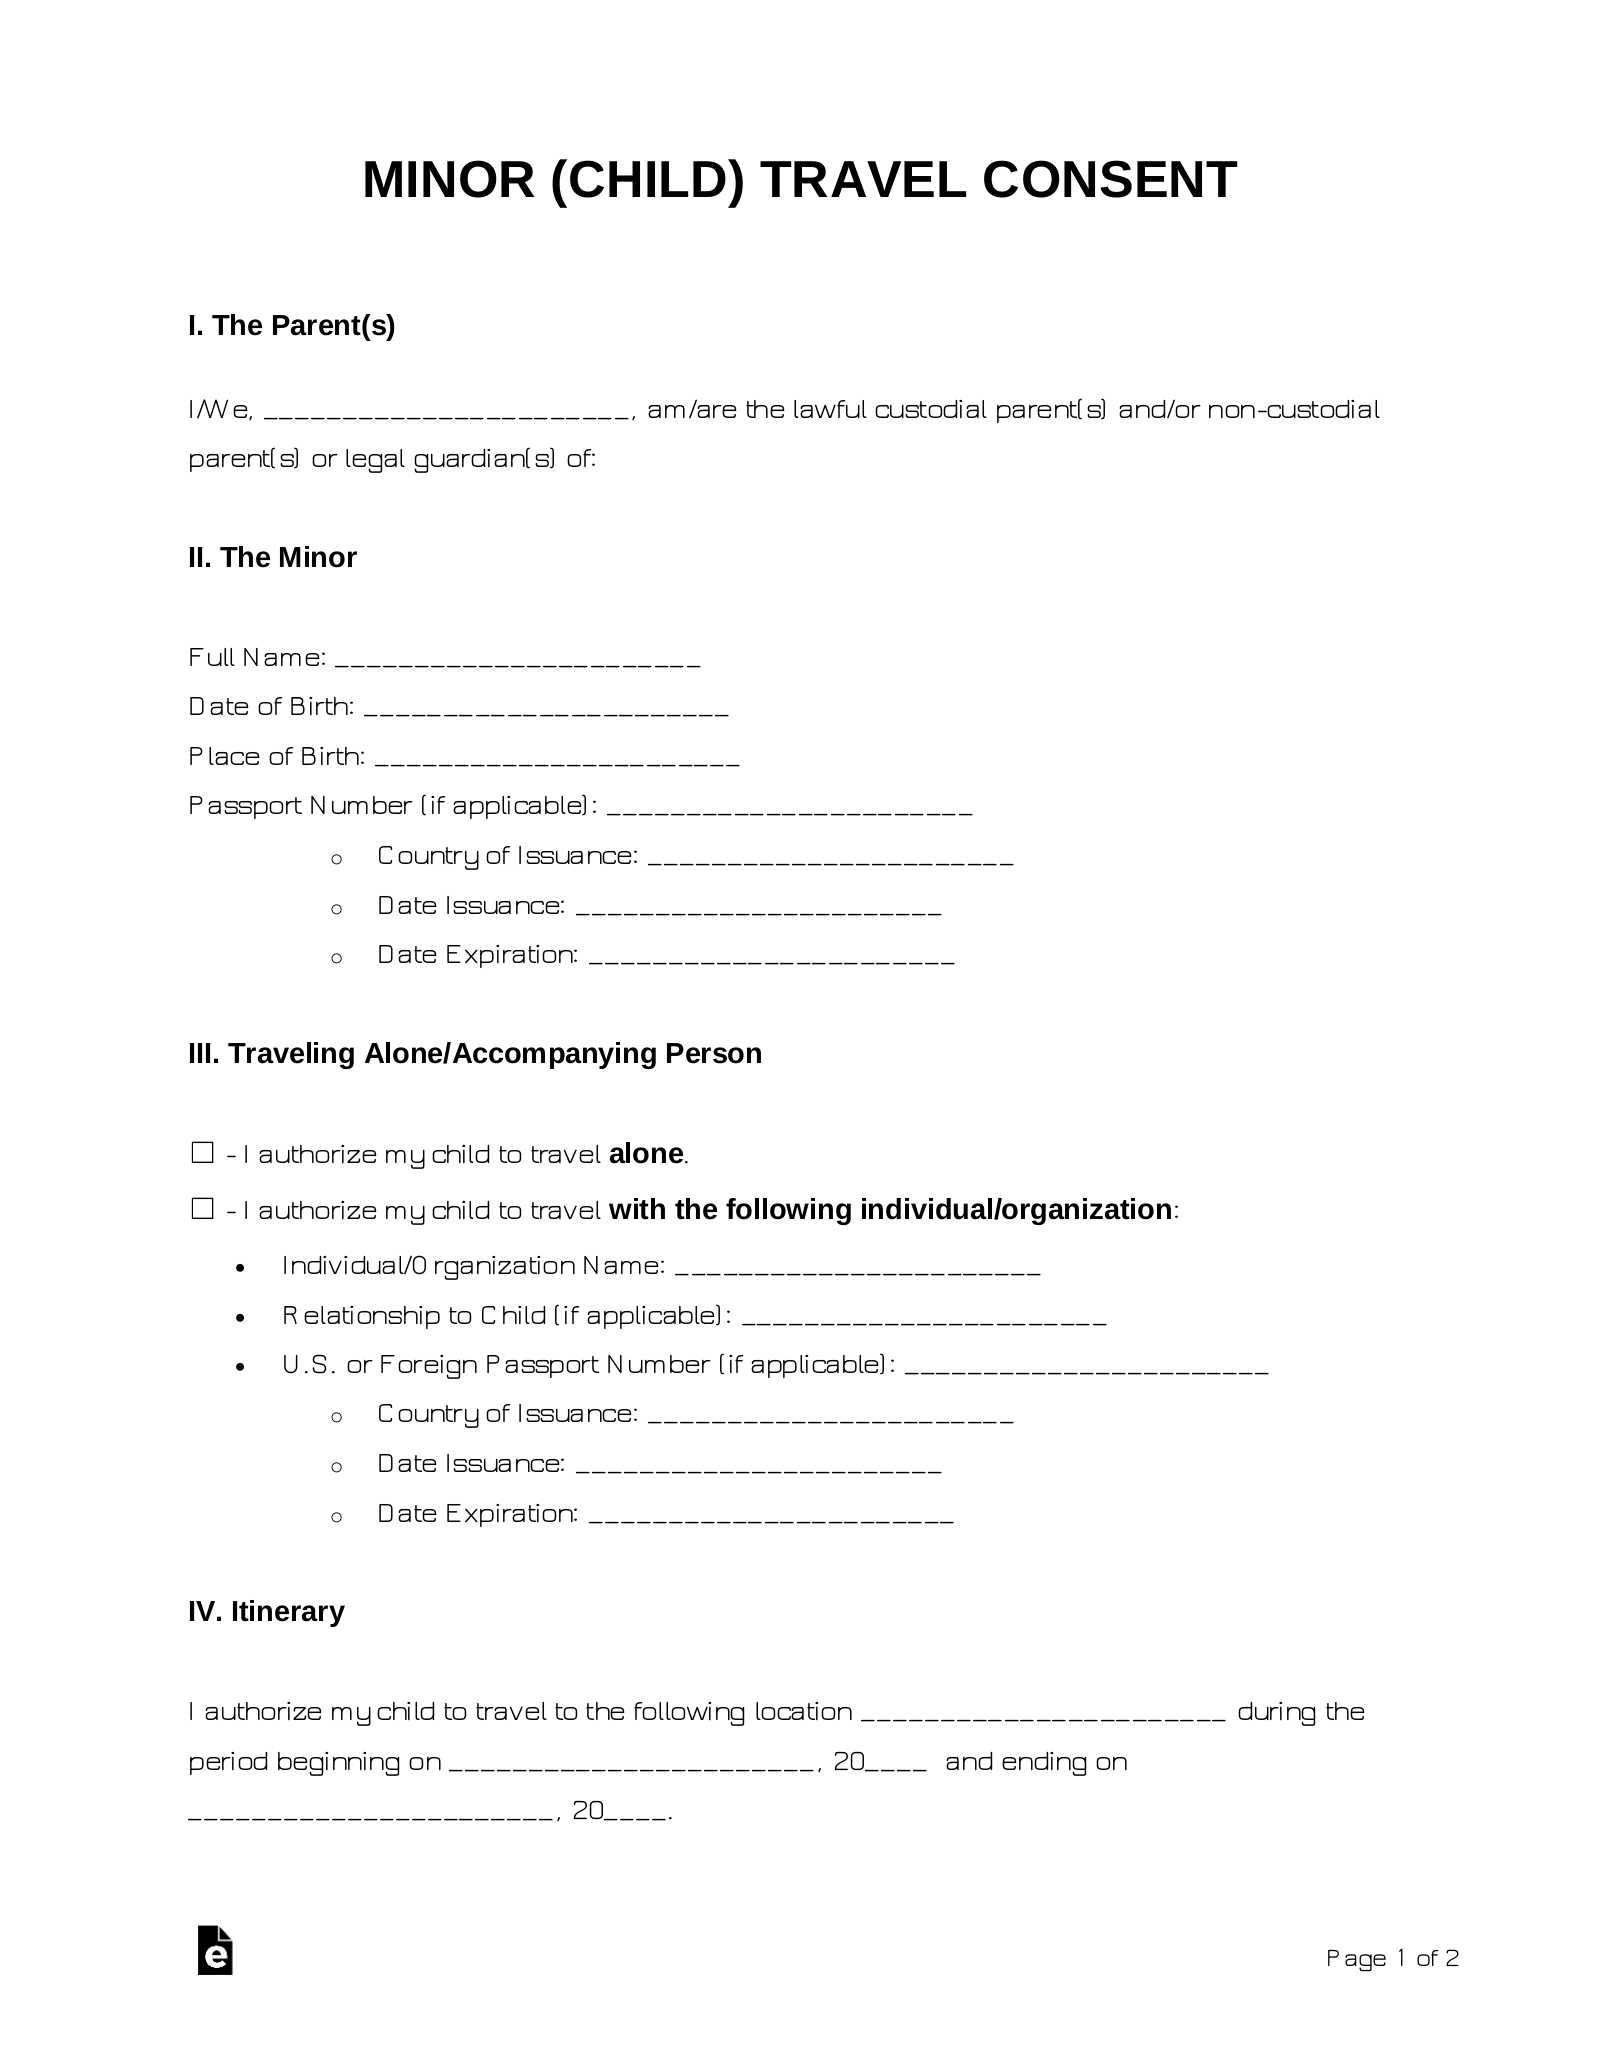 minor-travel-consent-form-carnival-cruise-2022-printable-consent-form